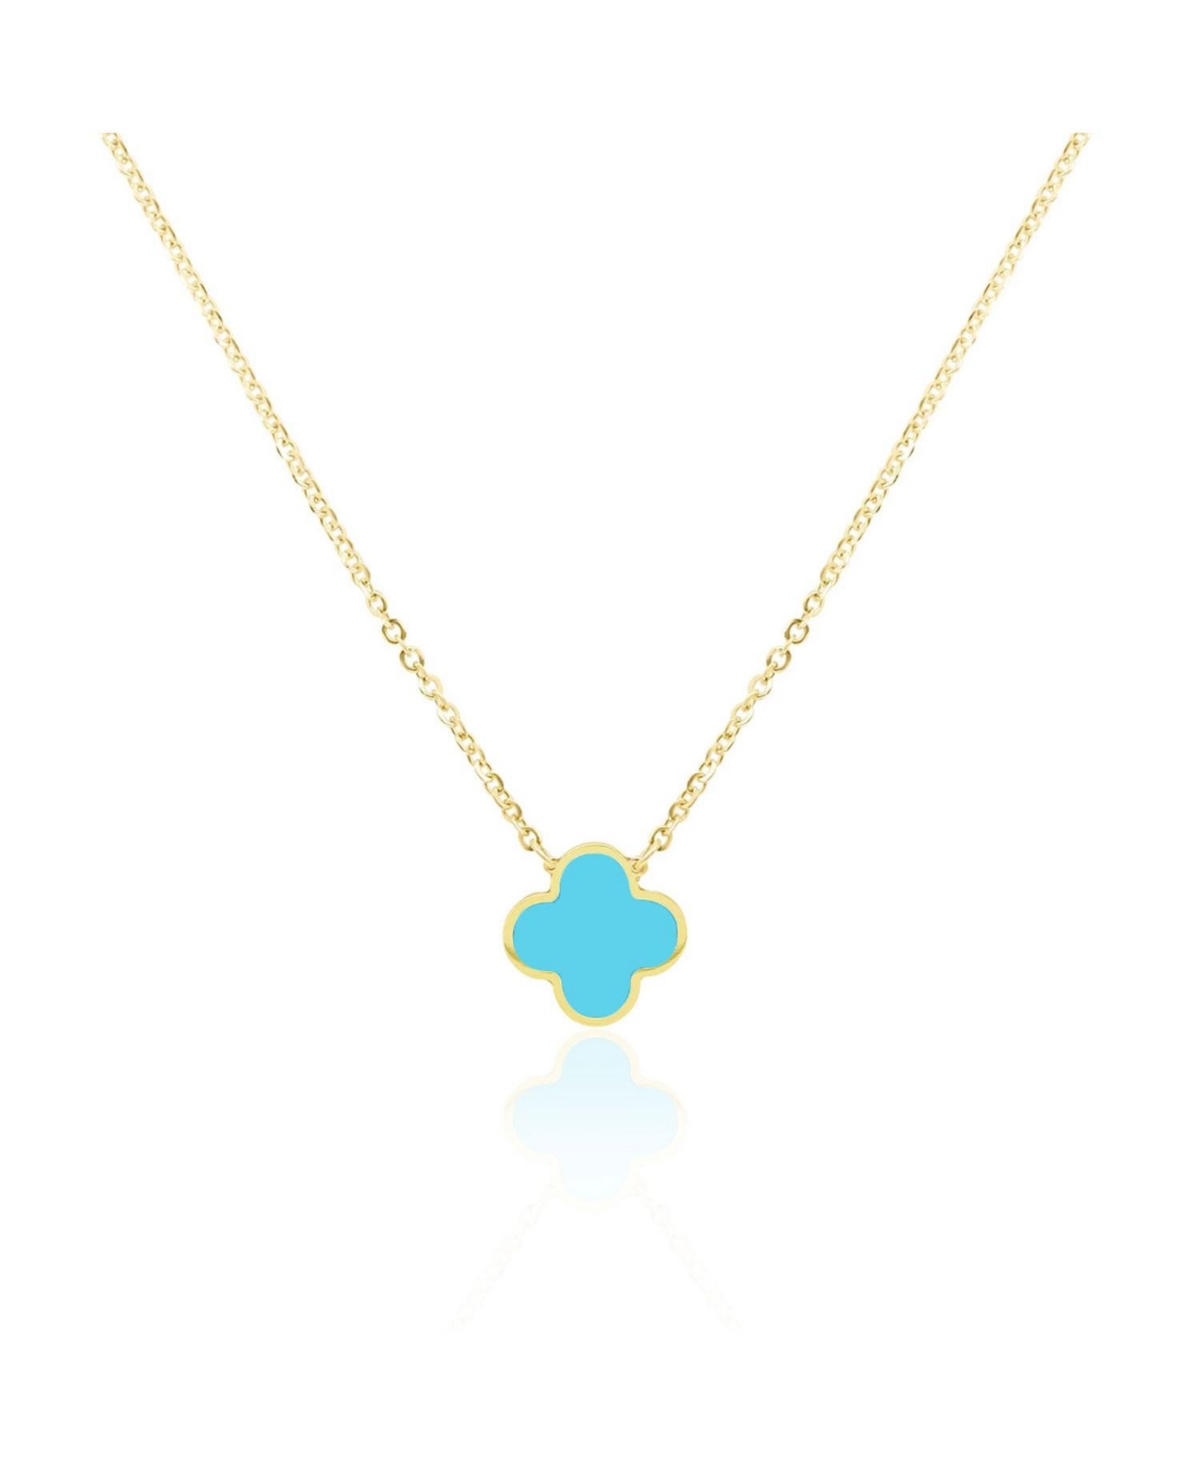 Small Turquoise Single Clover Necklace - Turquoise/aqua